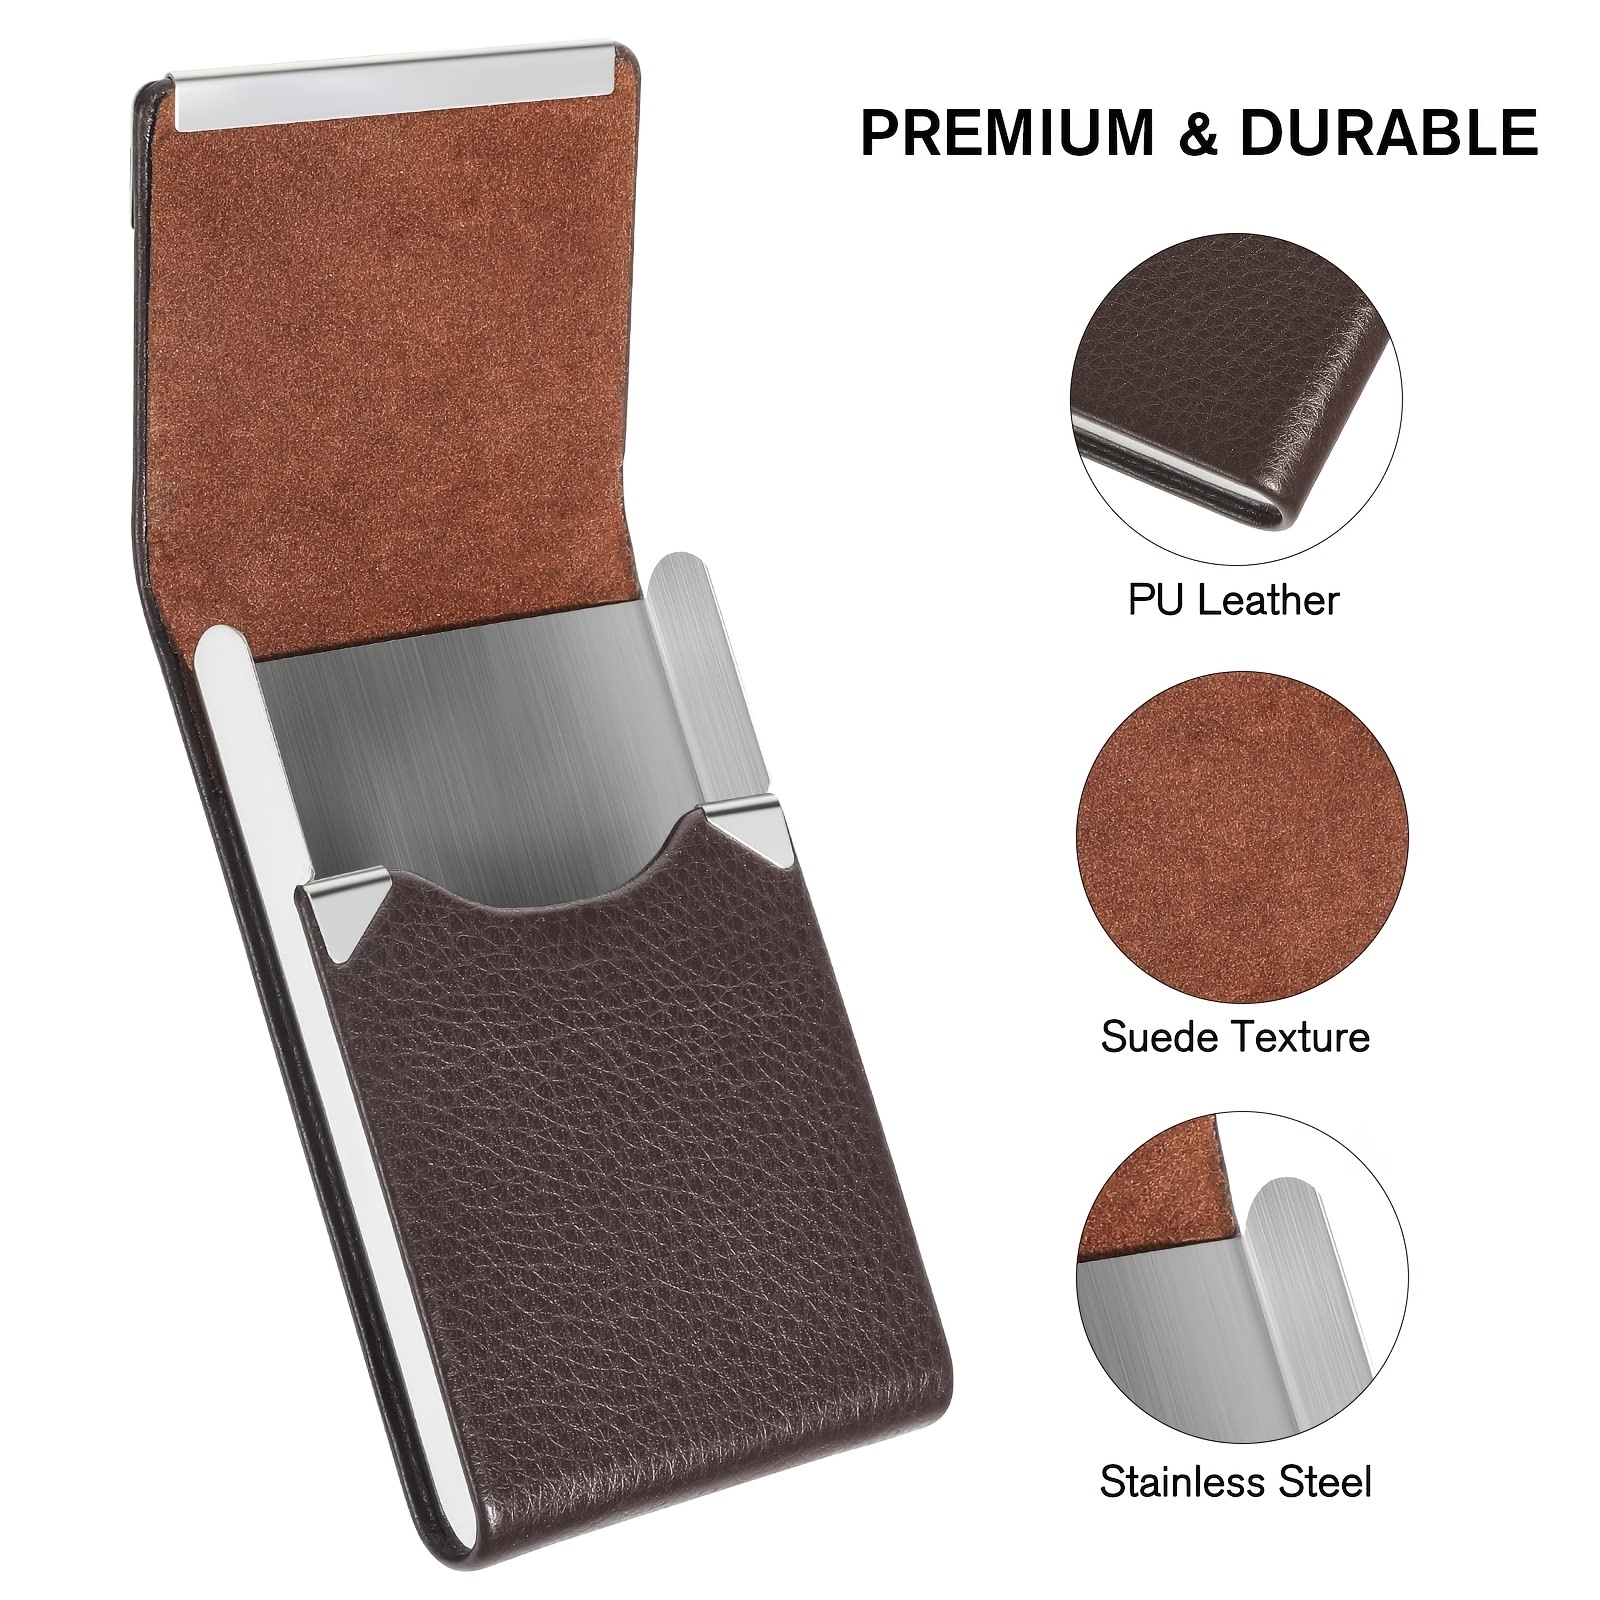 MaxGear Business Card Holder, PU Leather Business Card Case Pocket Business  Card Holders for Men or Women, Professional Slim Business Card Carrier